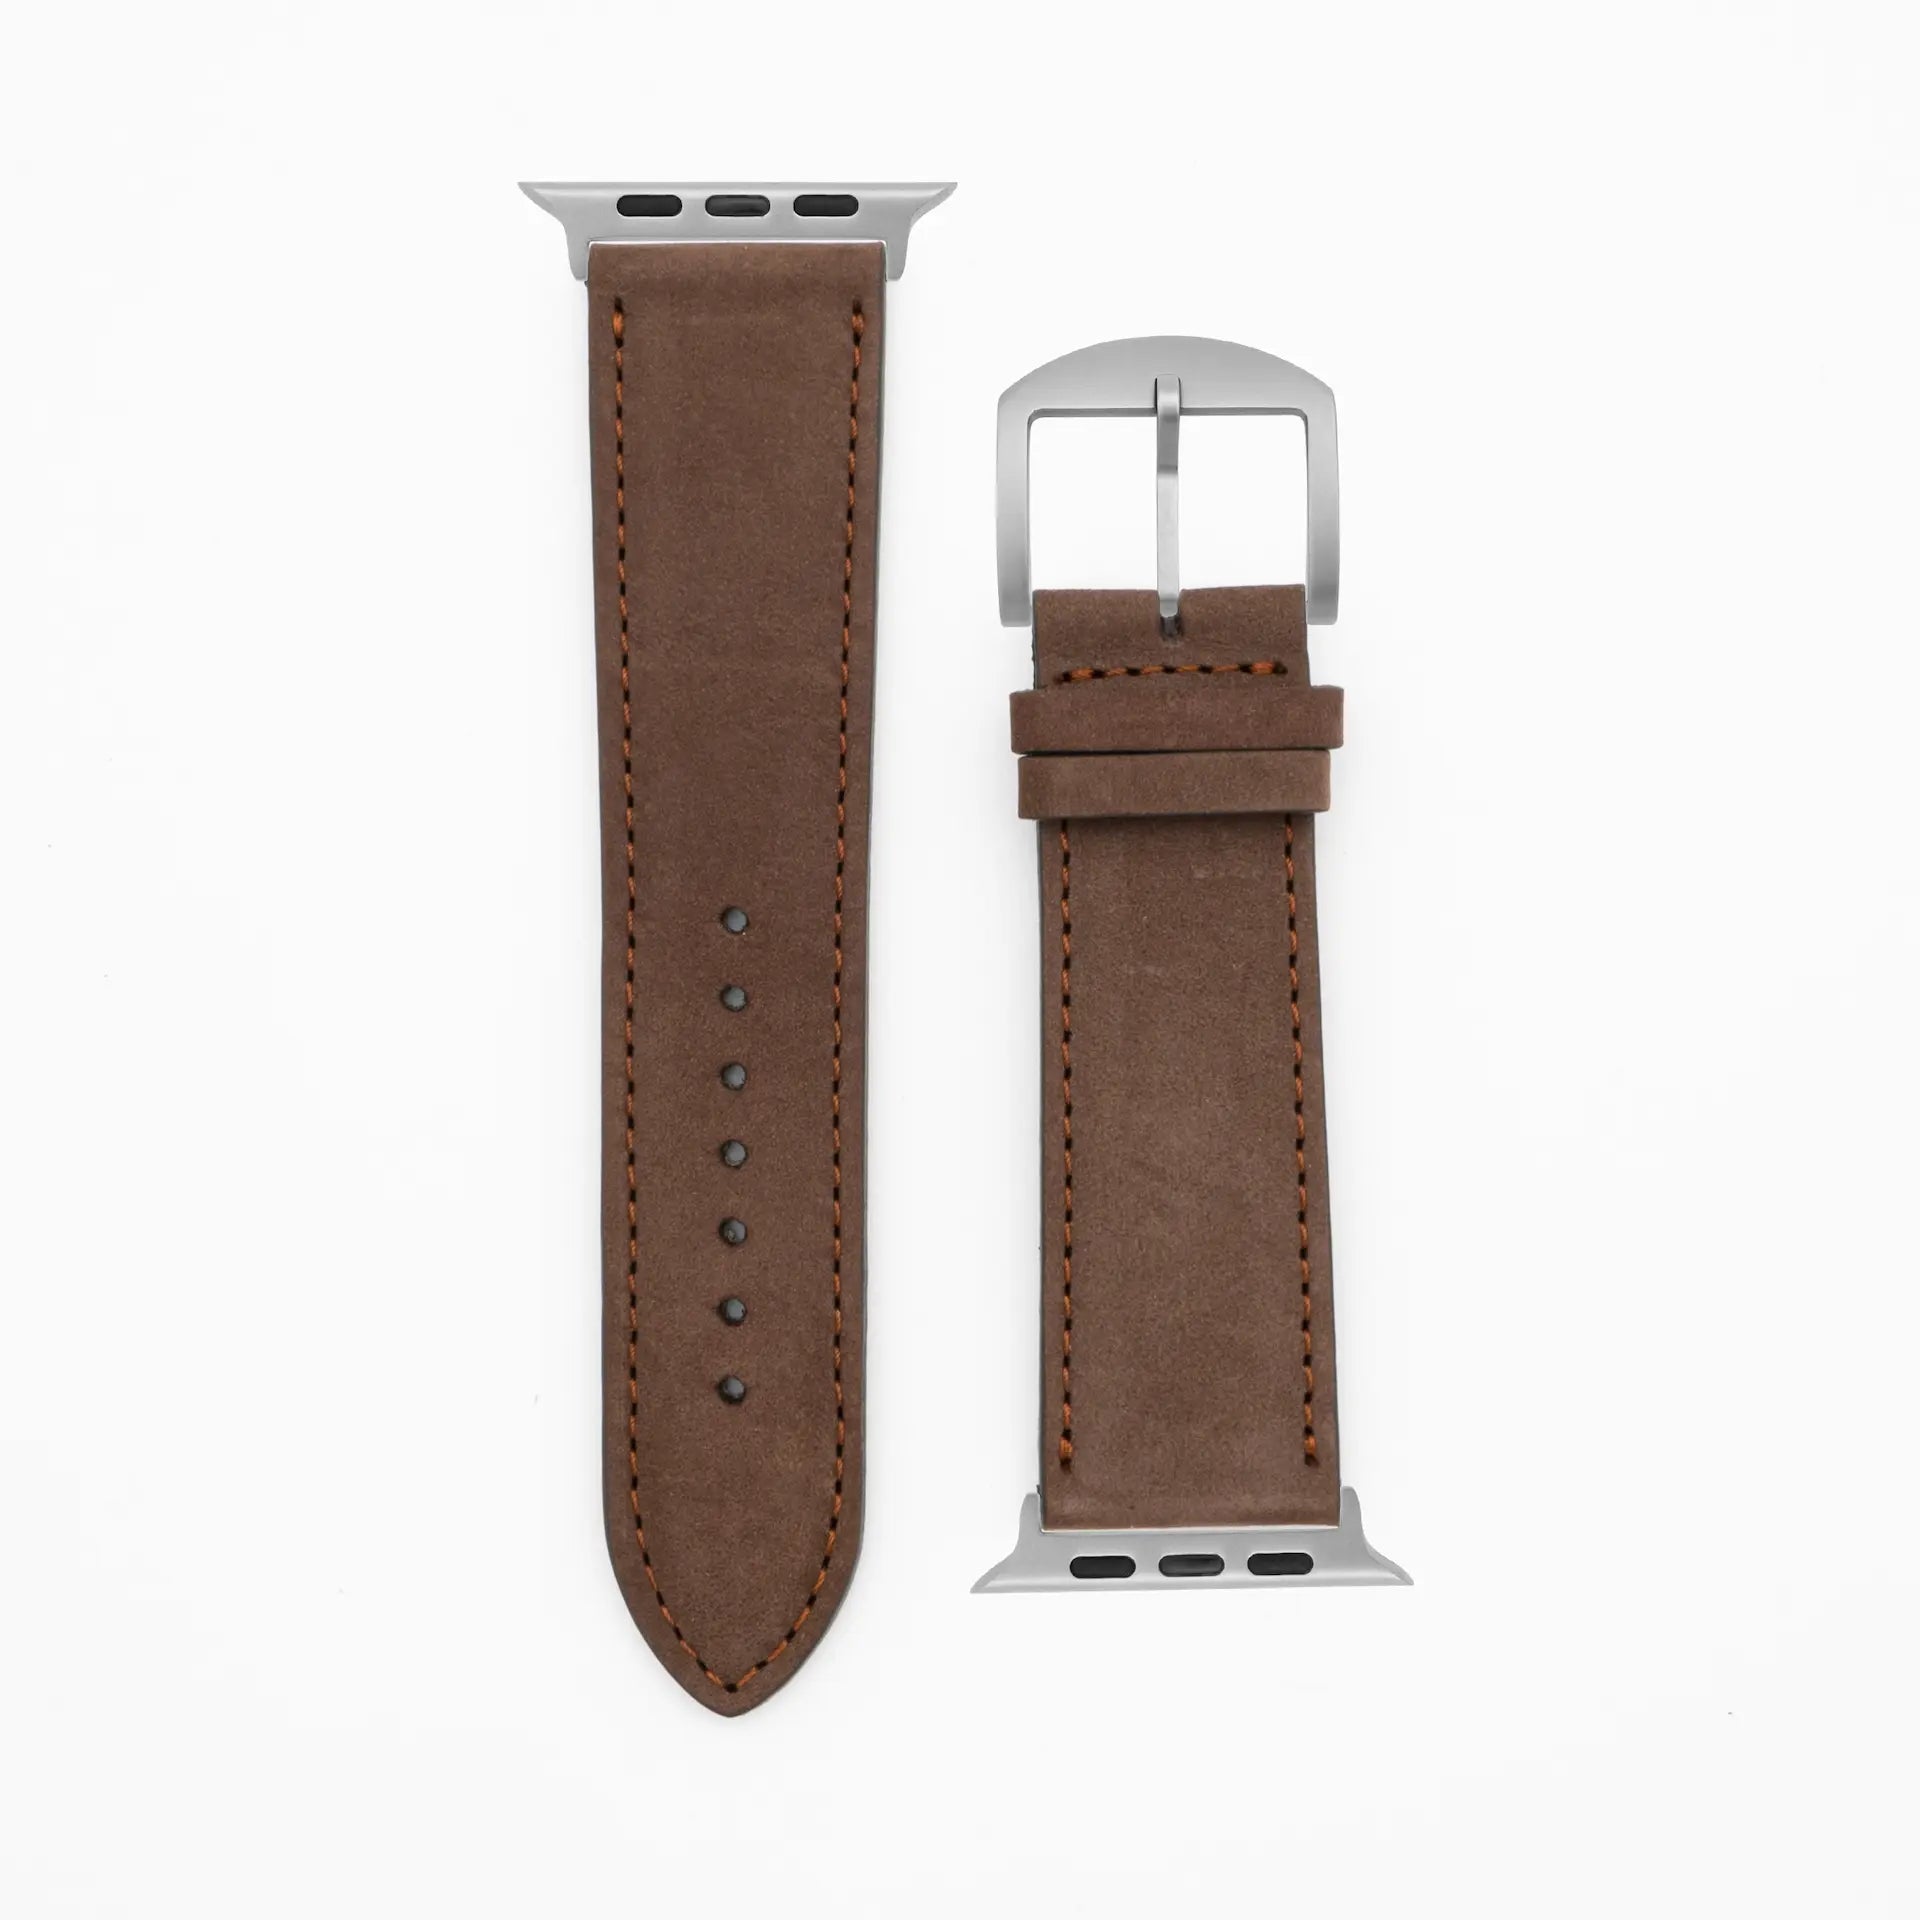 Suede - Classic - Dark brown leather strap-Apple Watch Ultra-49mm titanium band